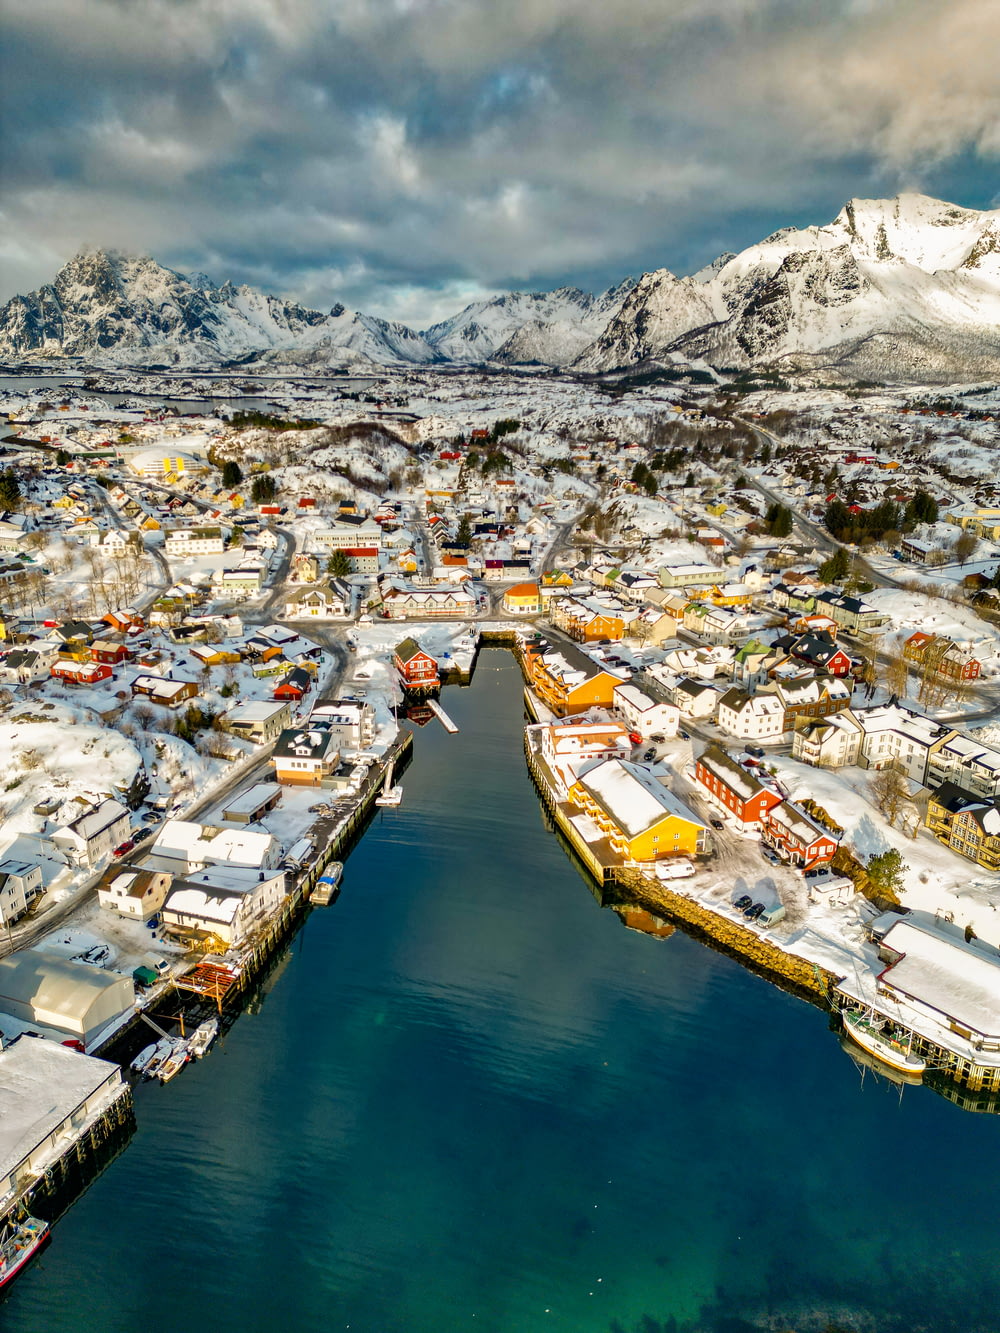 an aerial view of a snowy town and a body of water